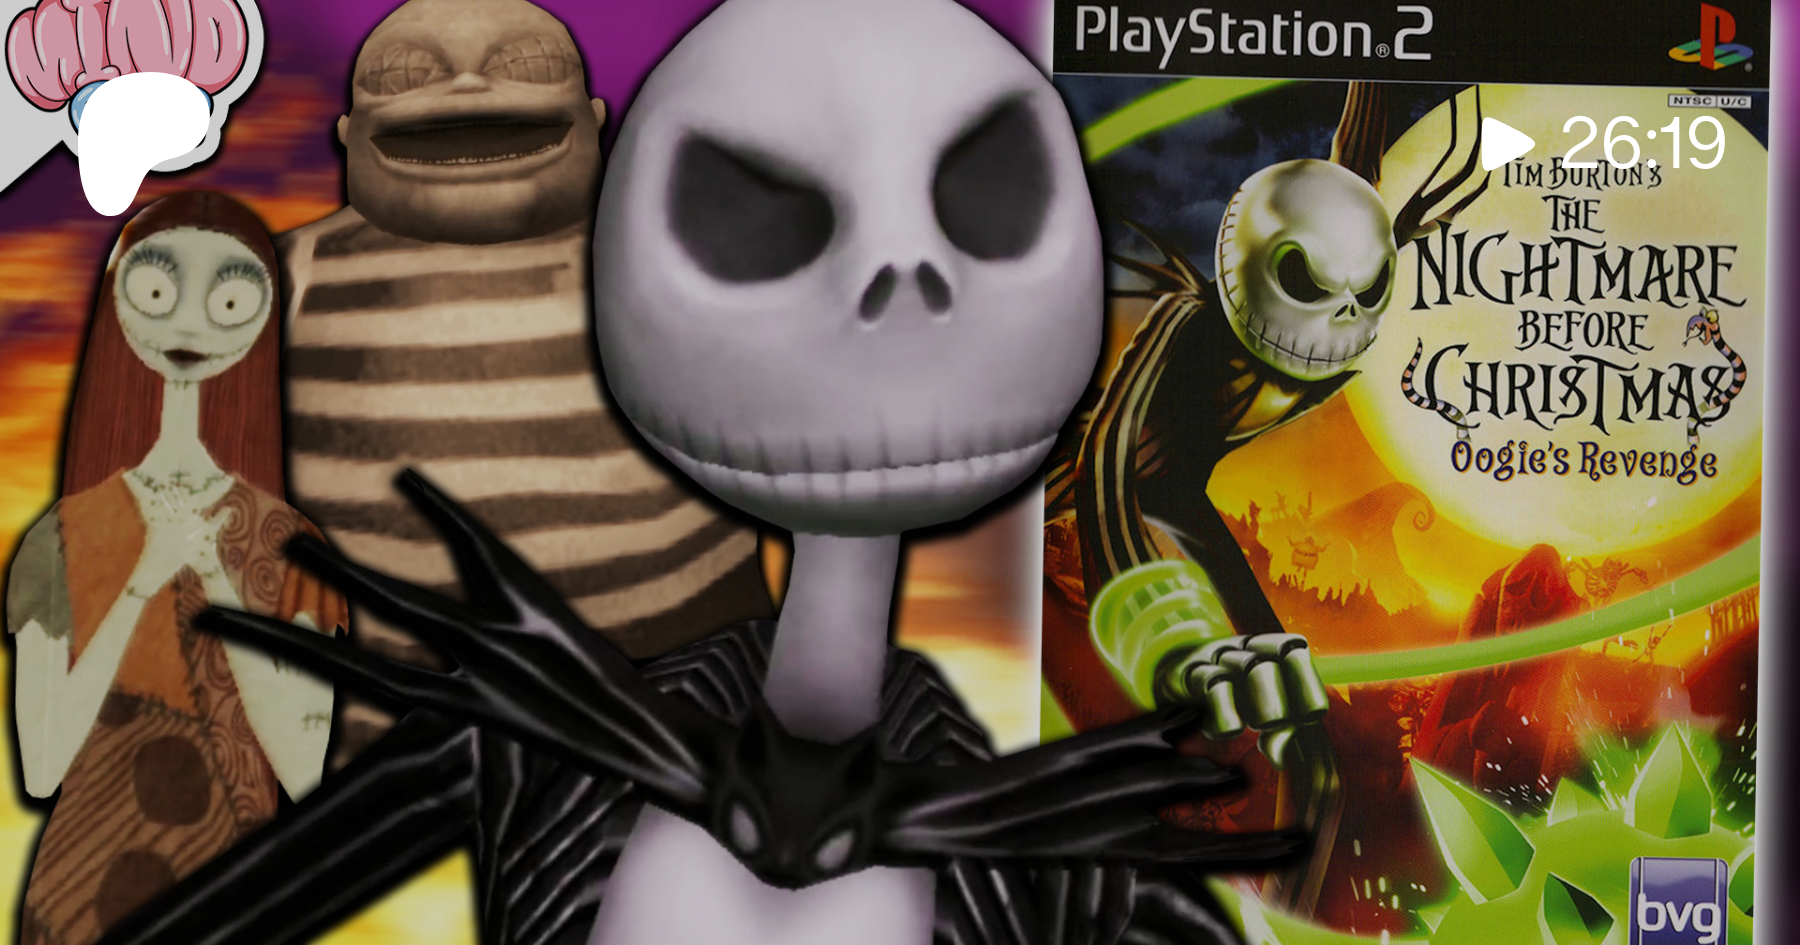 The AWESOME Nightmare Before Christmas game 